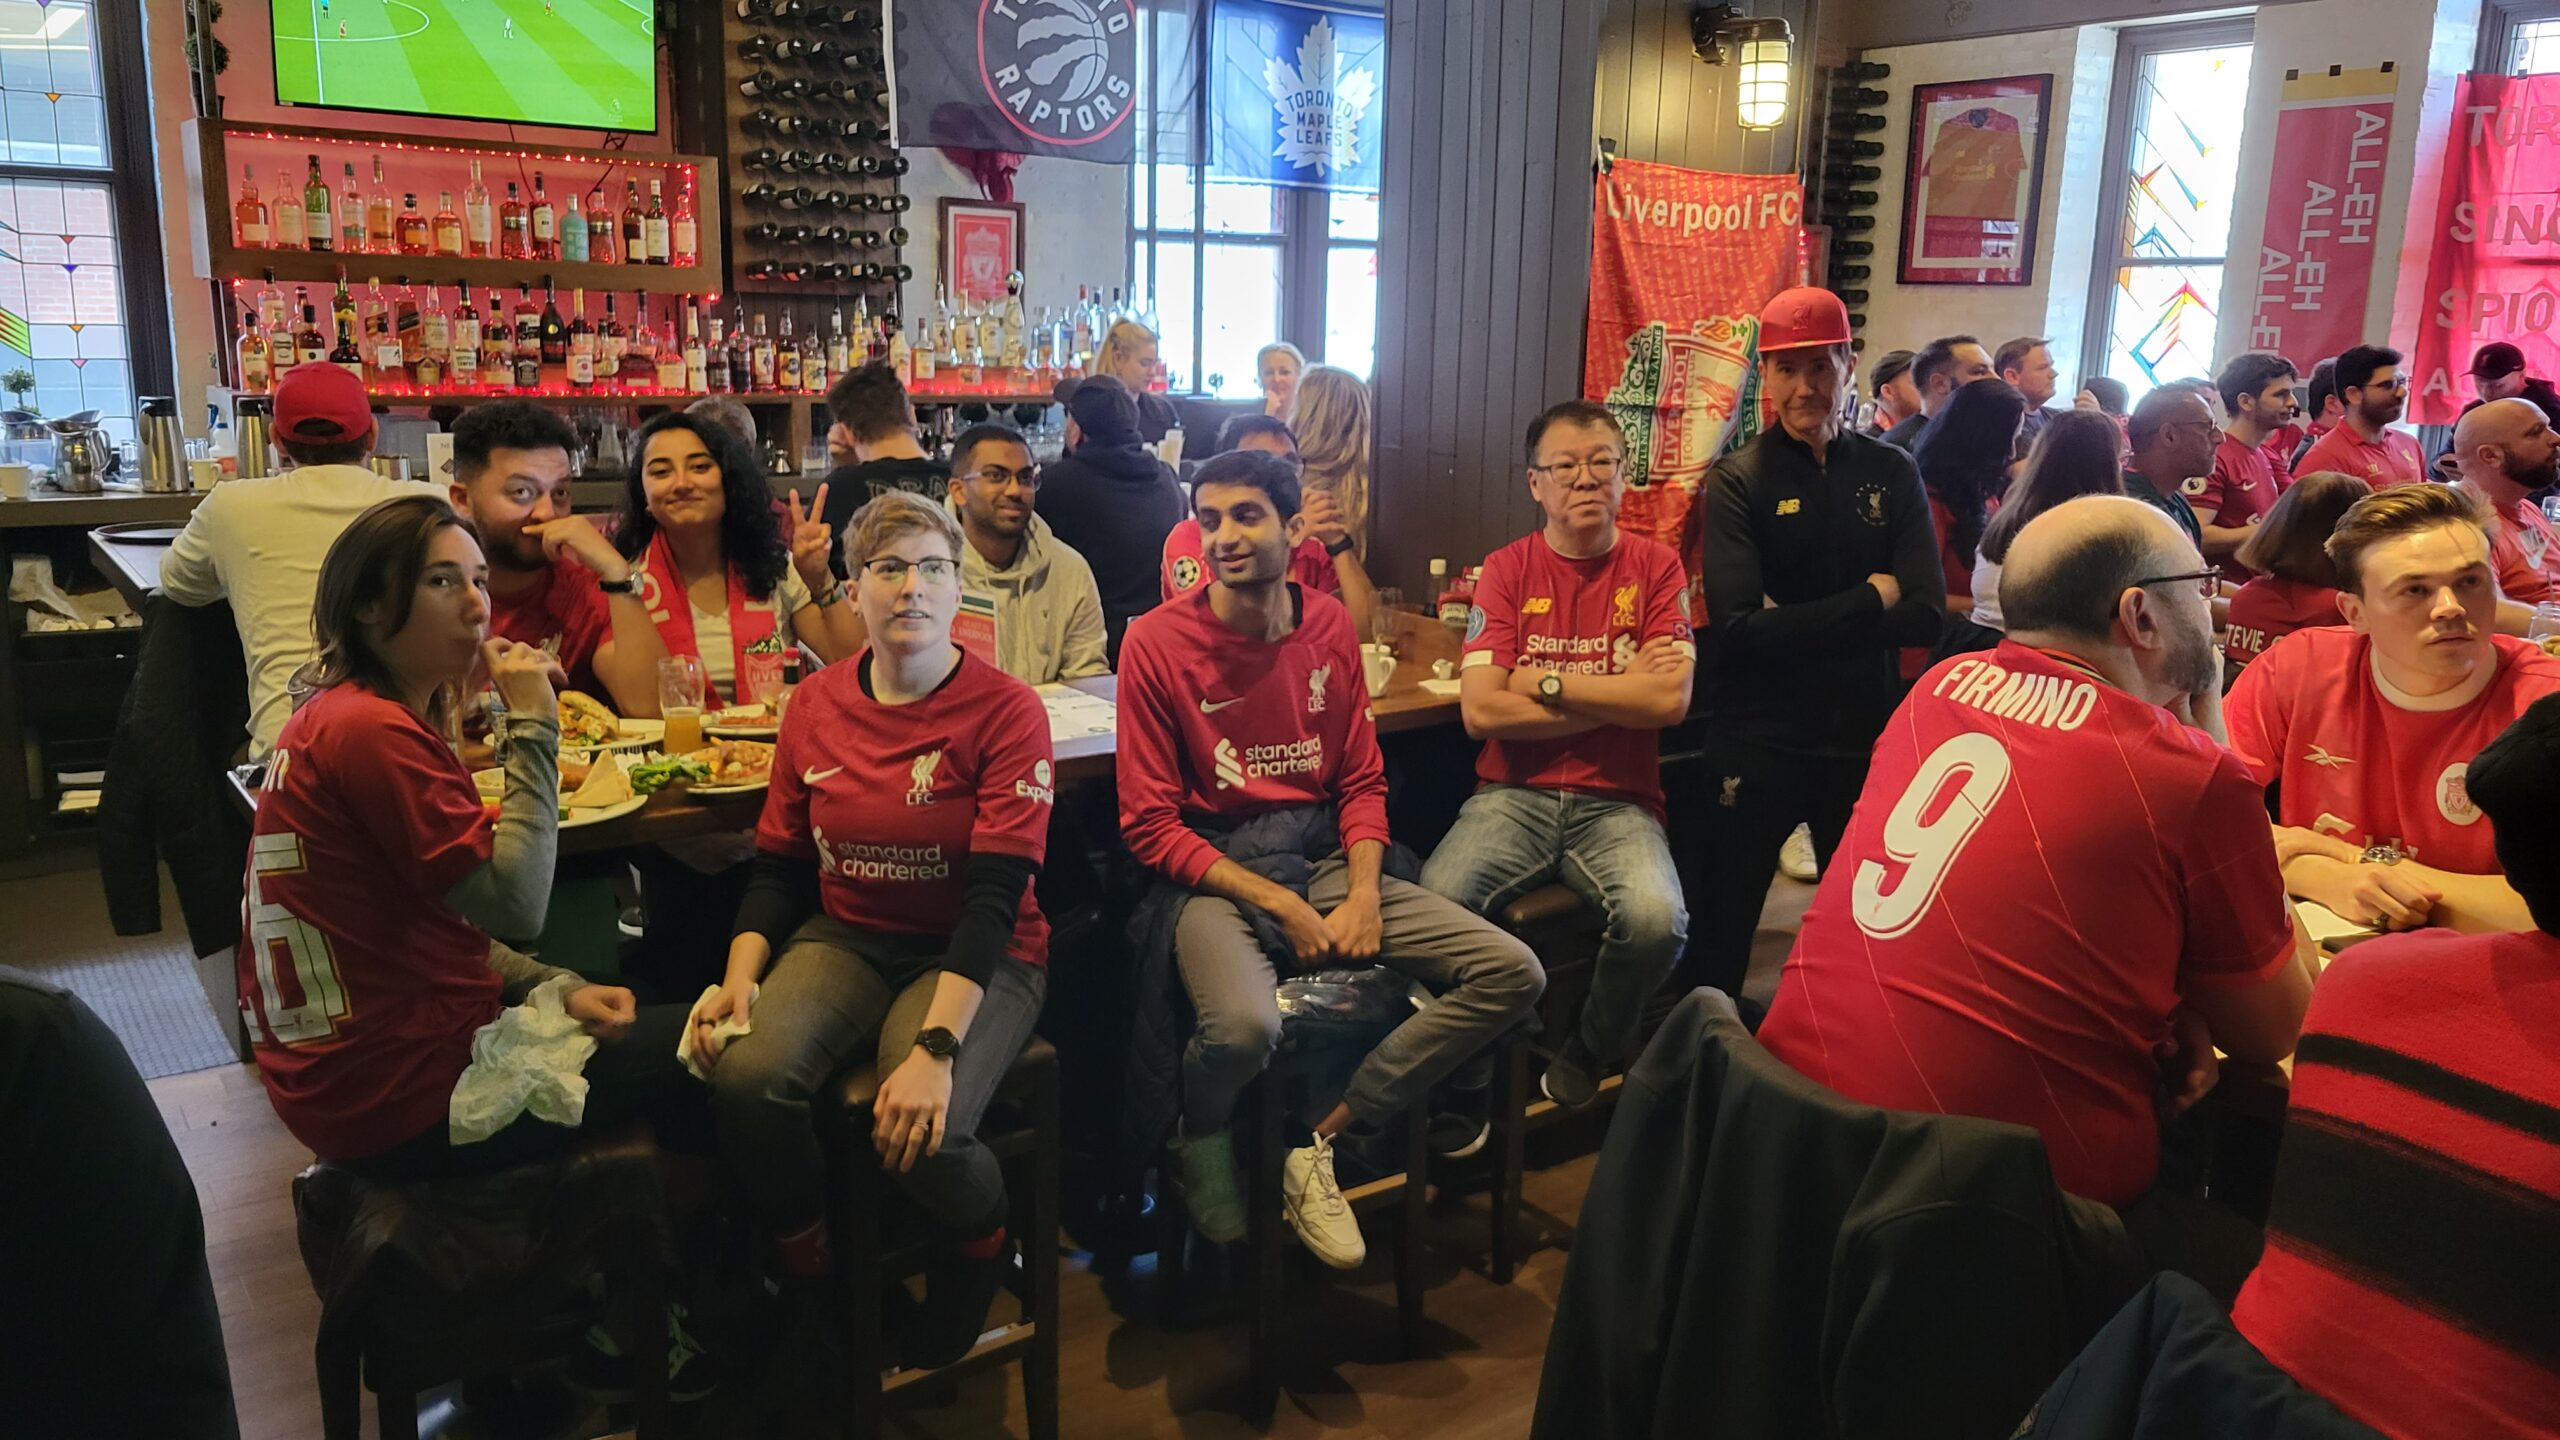 Watching Liverpool FC in Toronto